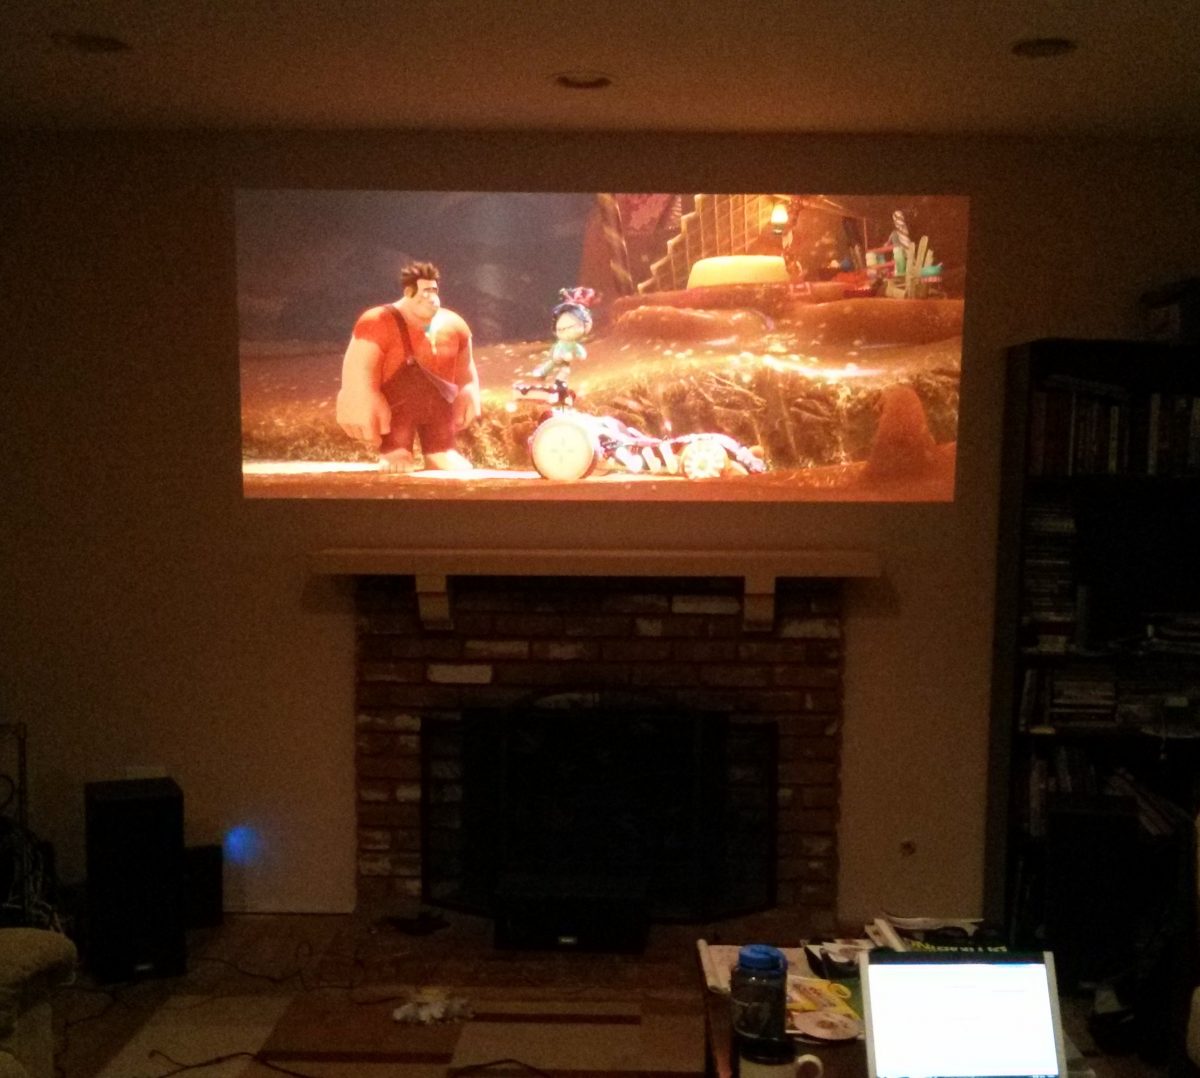 Tests of Home Theater